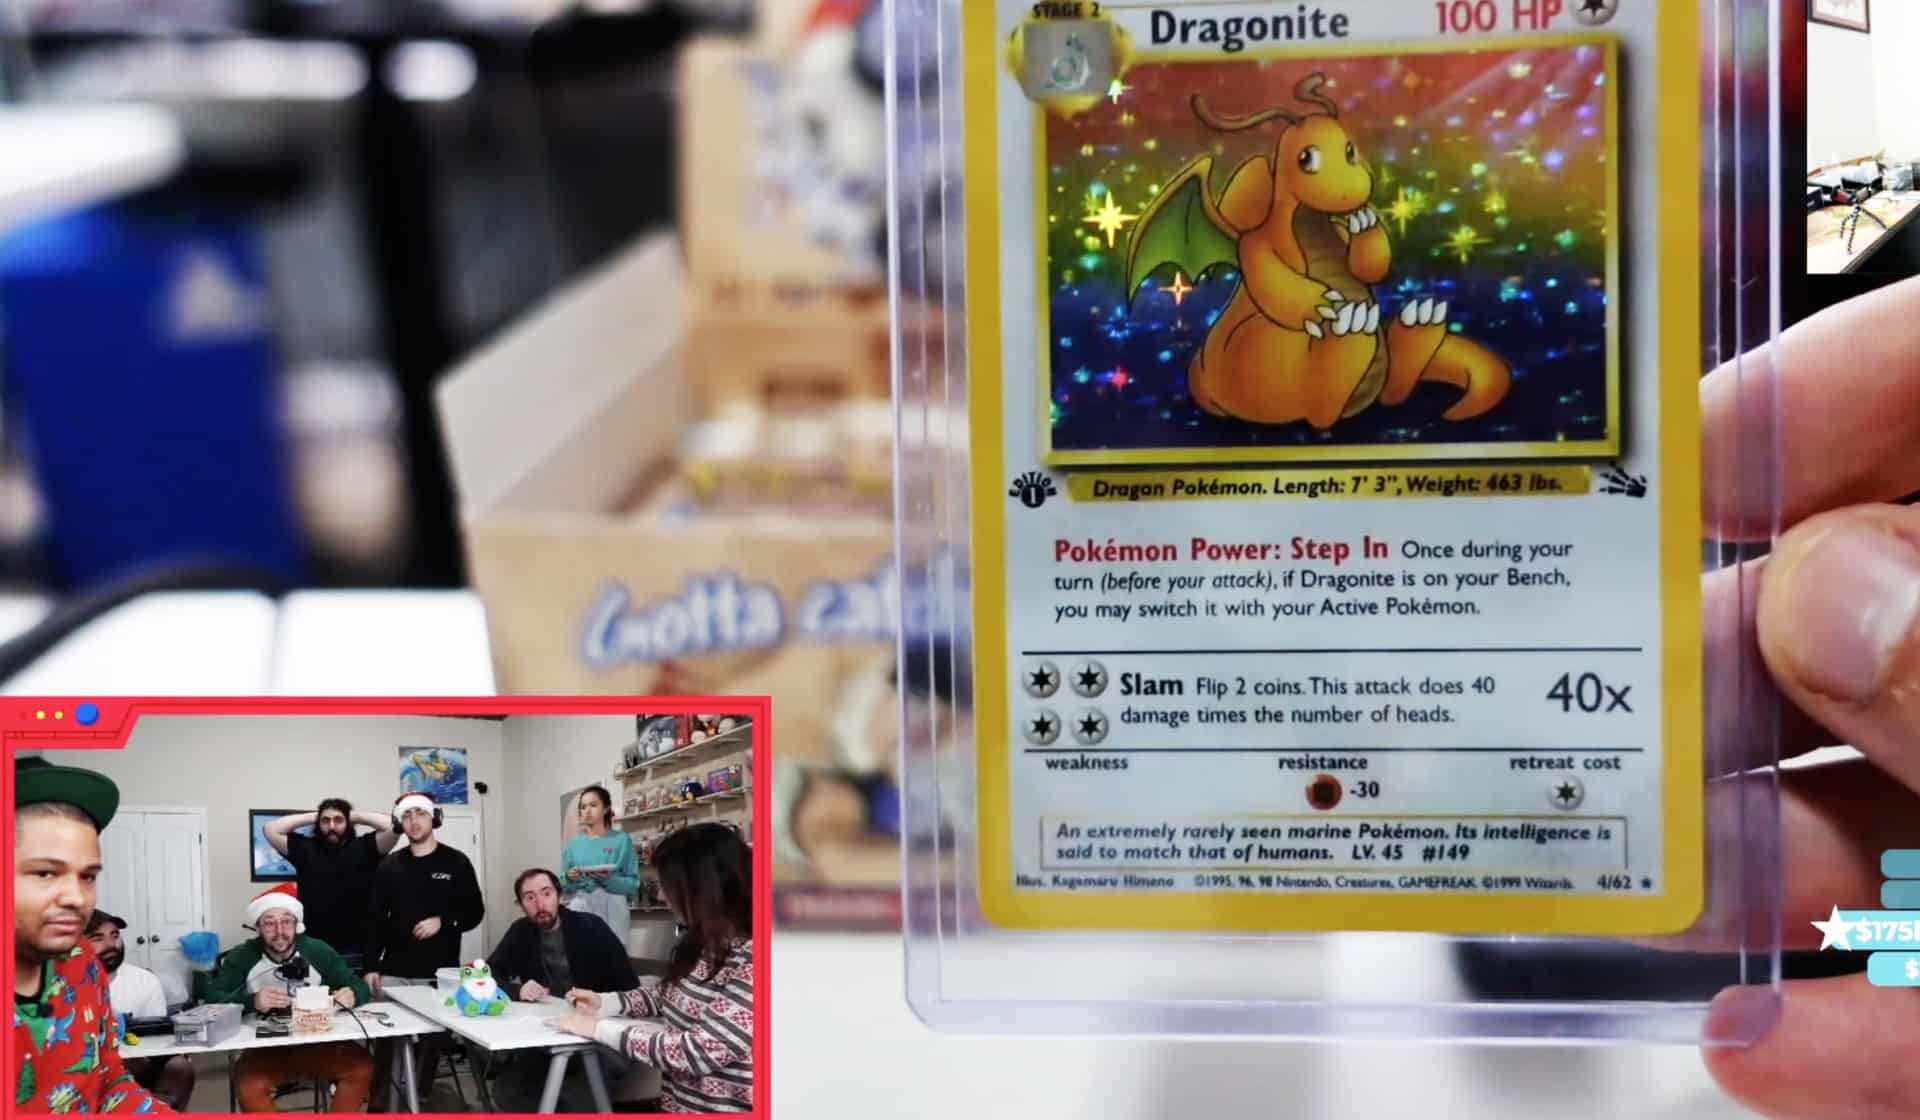 Twitch streamers react to Dragonite card during Pokemon broadcast.